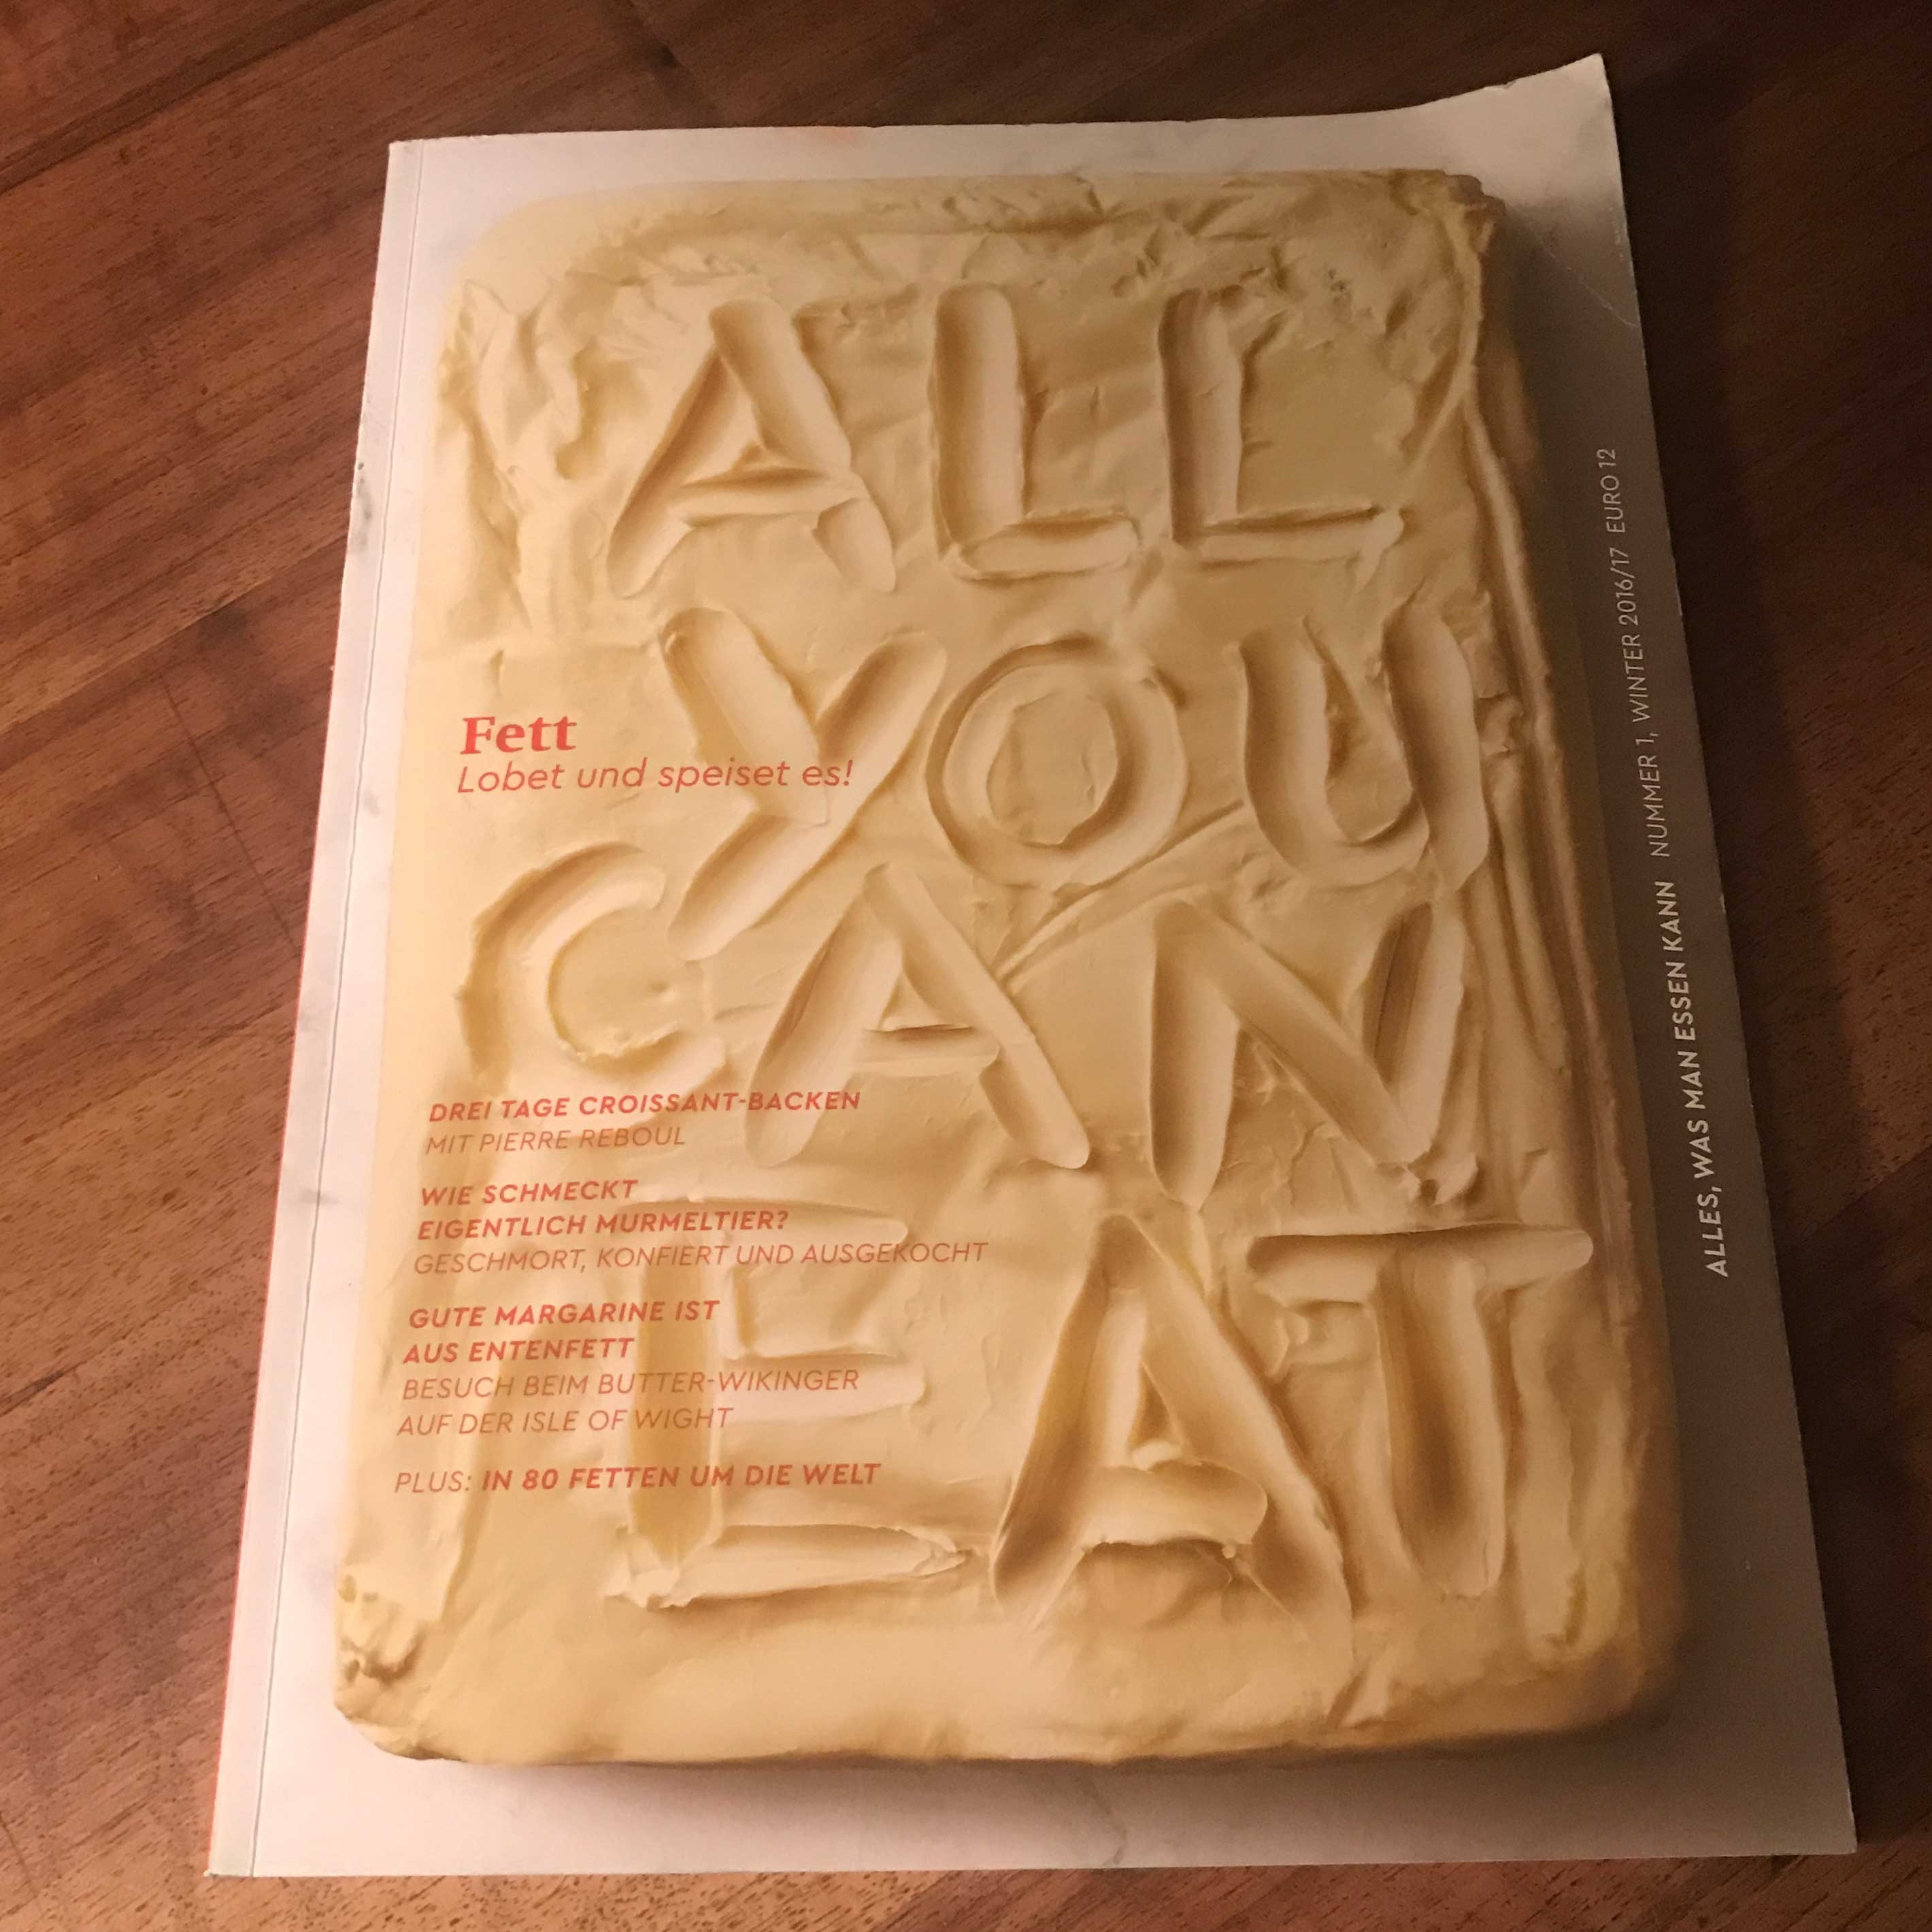 Neues Magazin: All you can eat